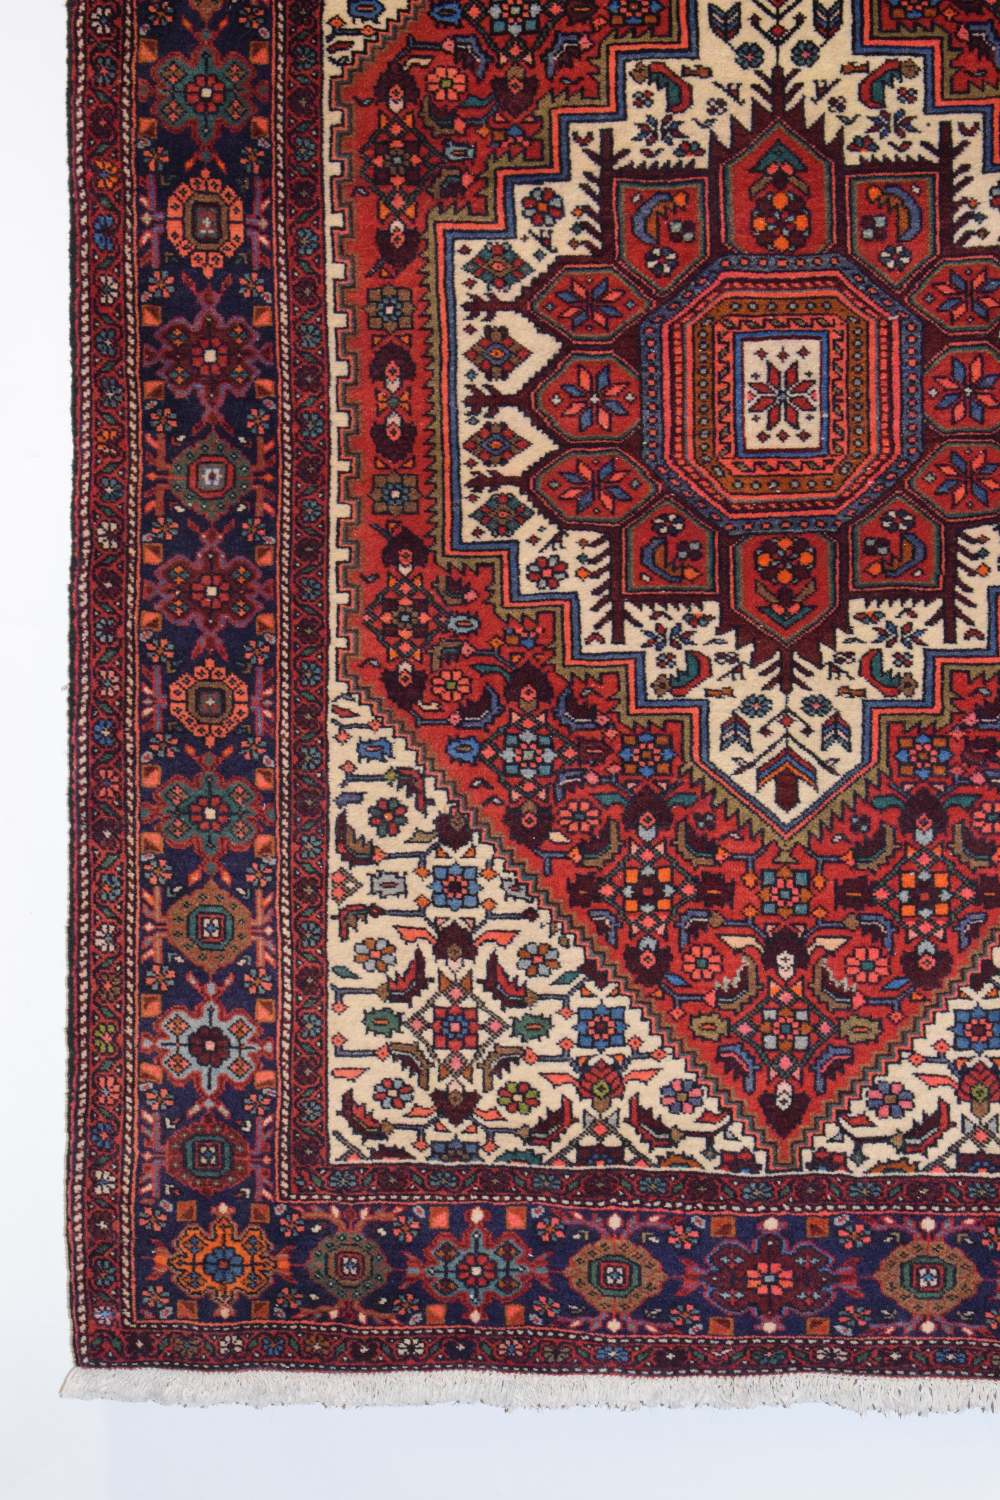 Bijar rug, north west Persia, second half 20th century, 4ft. 10in. X 3ft. 4in. 1.47m. X 1.02m. - Image 5 of 9